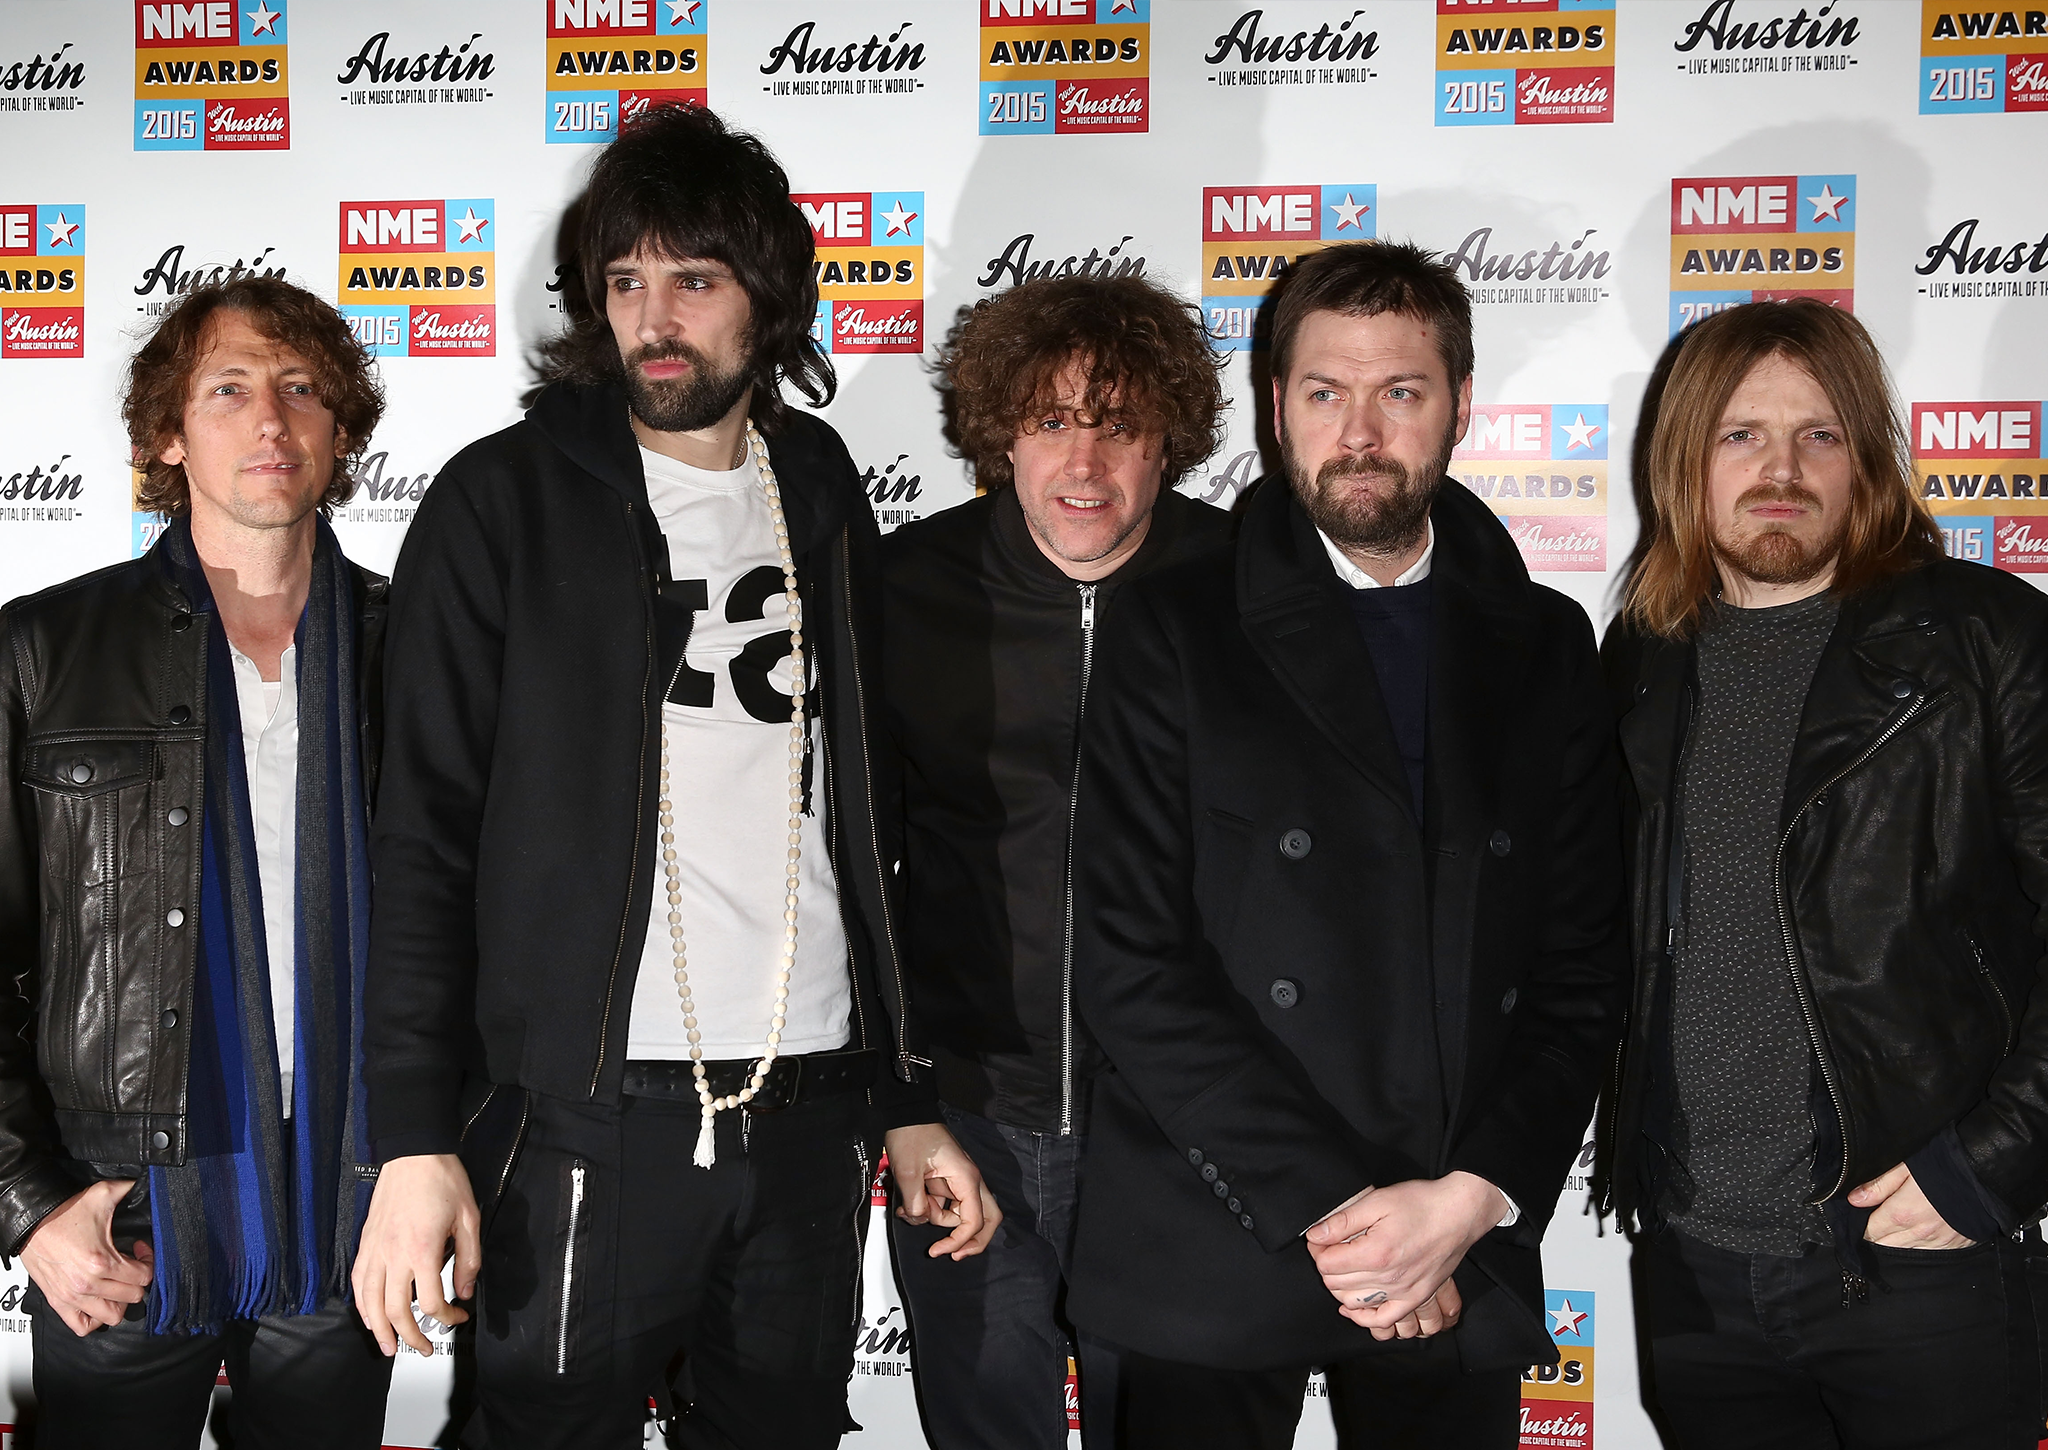 Check these cool guys out: Kasabian line up at this year's NME Awards